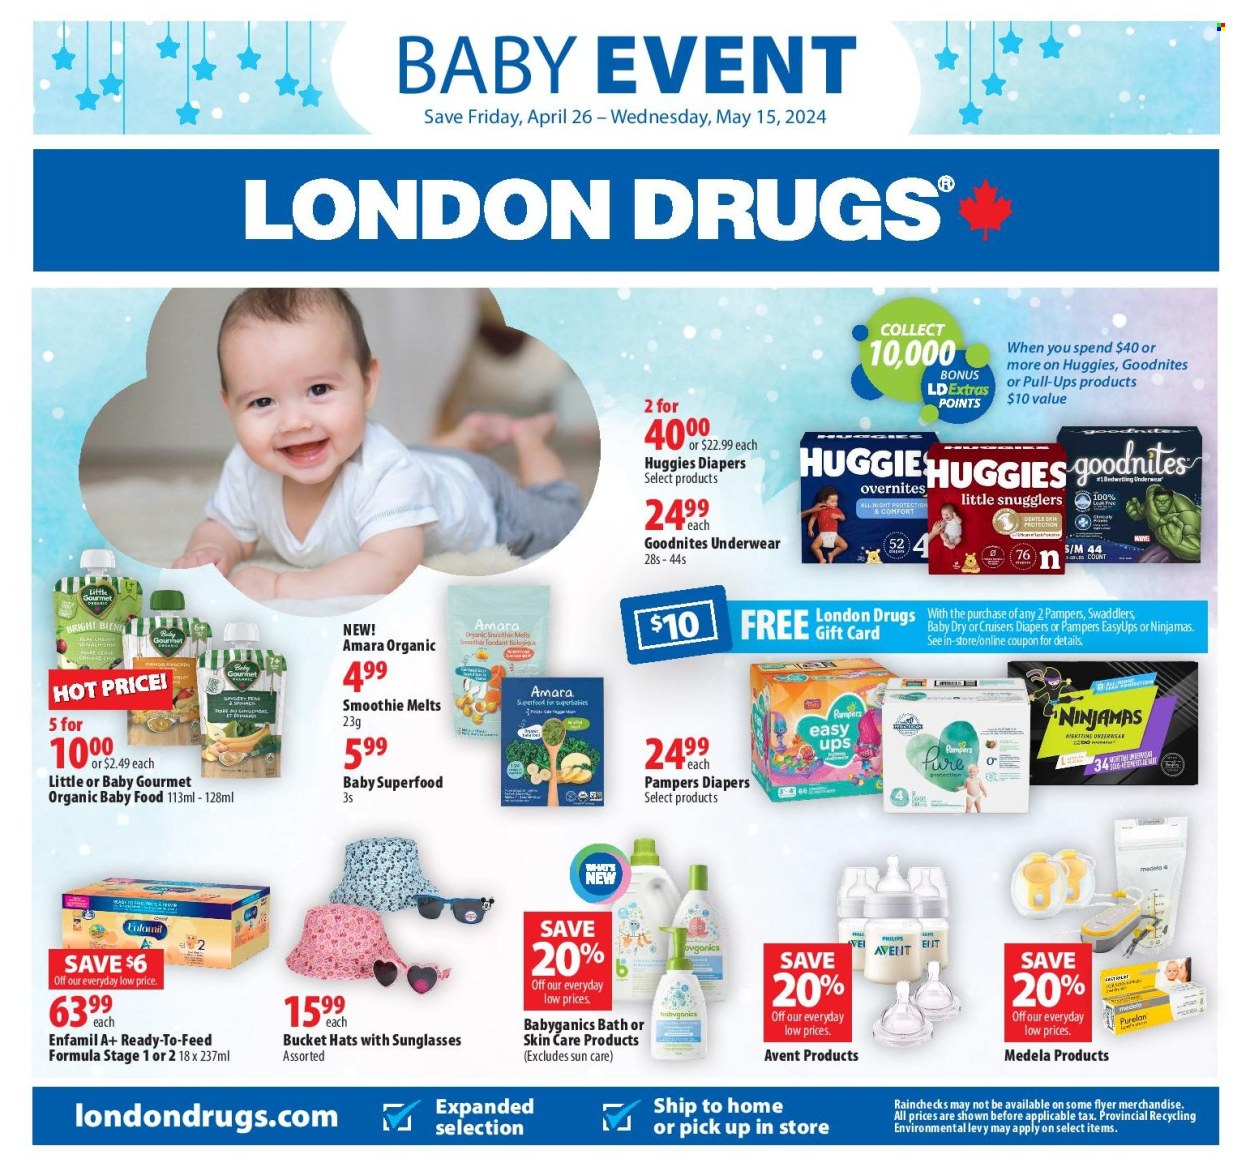 thumbnail - Circulaire London Drugs - 26 Avril 2024 - 15 Mai 2024 - Produits soldés - Philips, Fondant, gingembre, smoothie, Huggies, Pampers. Page 1.